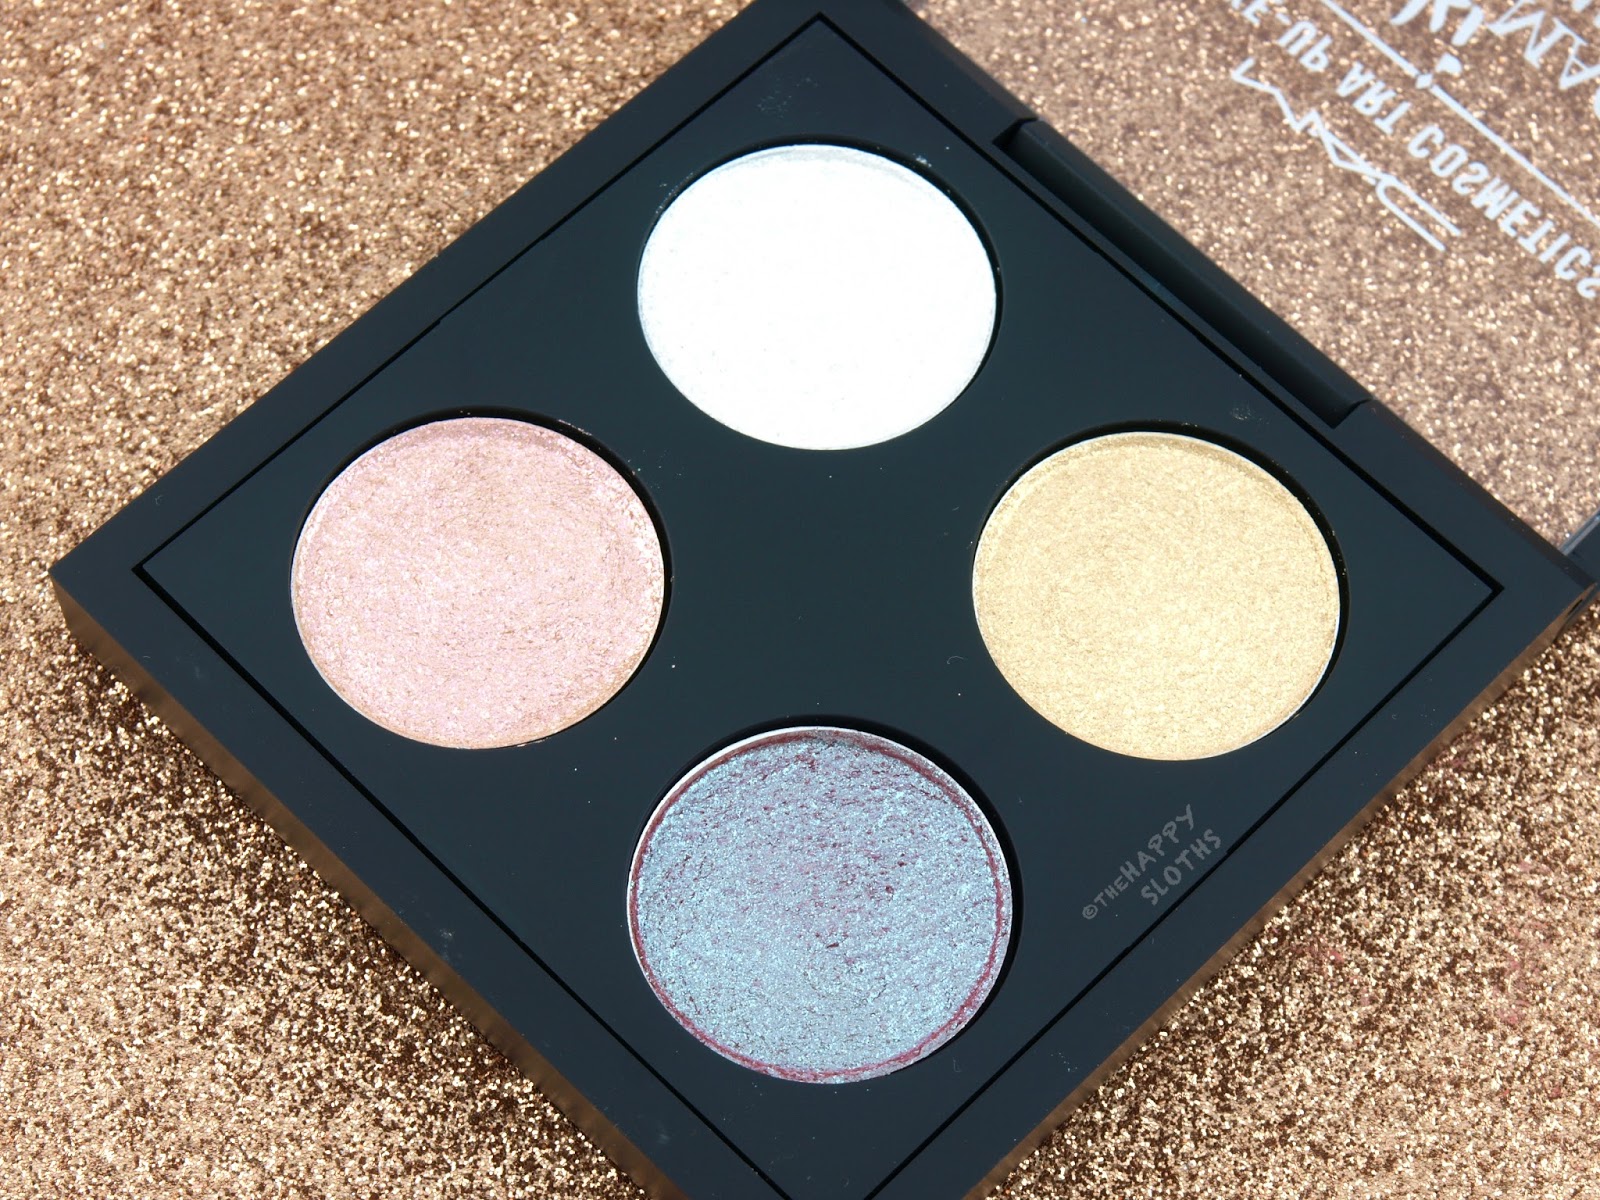 MAC Make-up Art Cosmetics Collection | Kabuki Magic Dazzleshadow X 4 Palette: Review and Swatches 